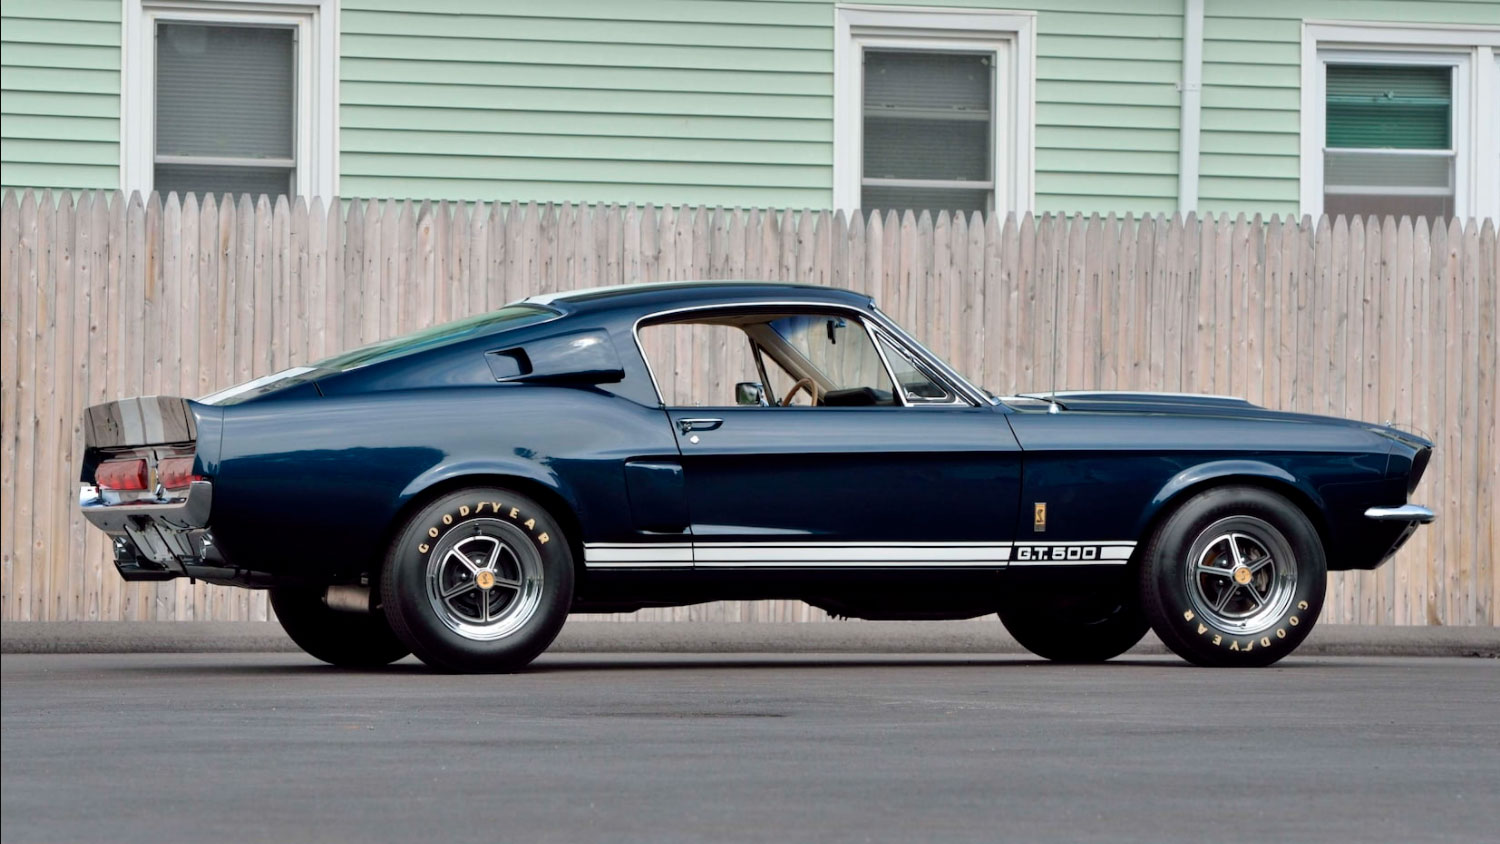 Award-Winning 1967 Shelby GT500 Fastback Headed To Auction